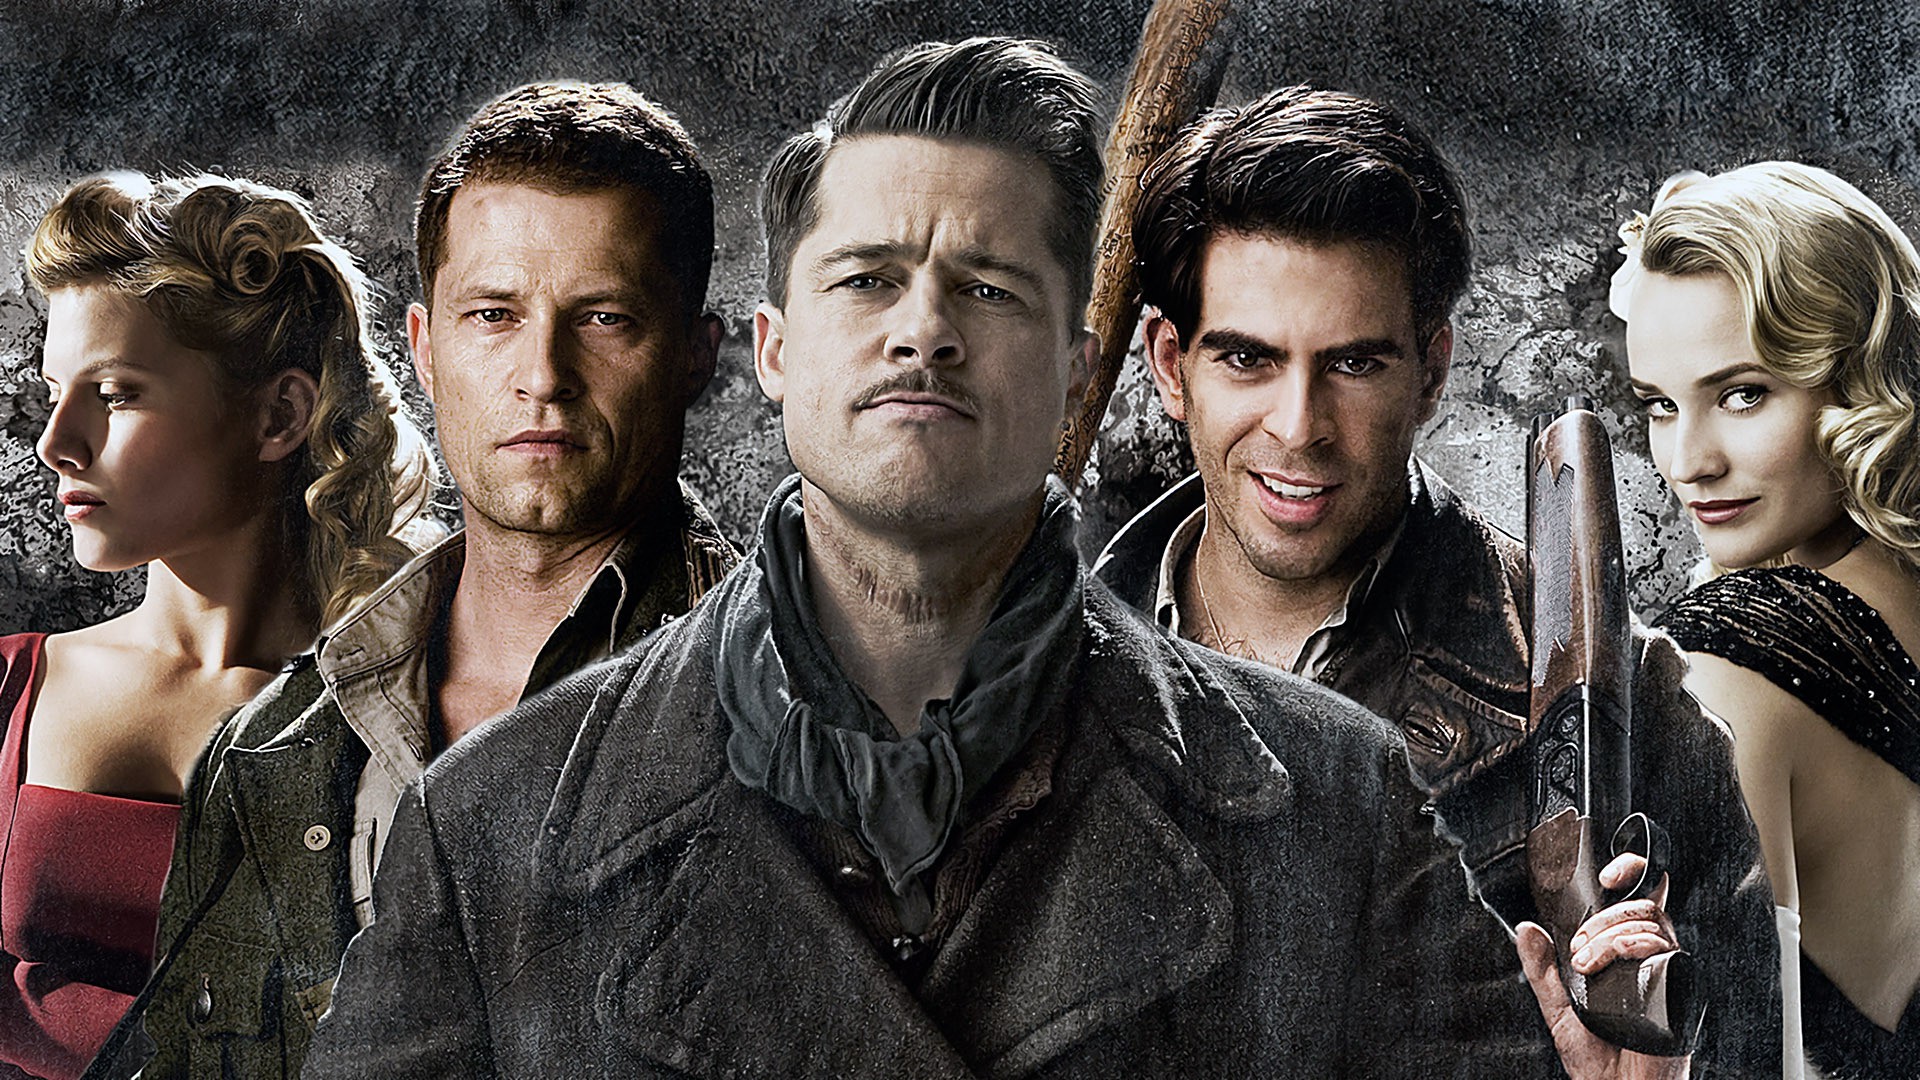 Inglourious Basterds Movies Wallpapers Hd Desktop And Mobile Images, Photos, Reviews